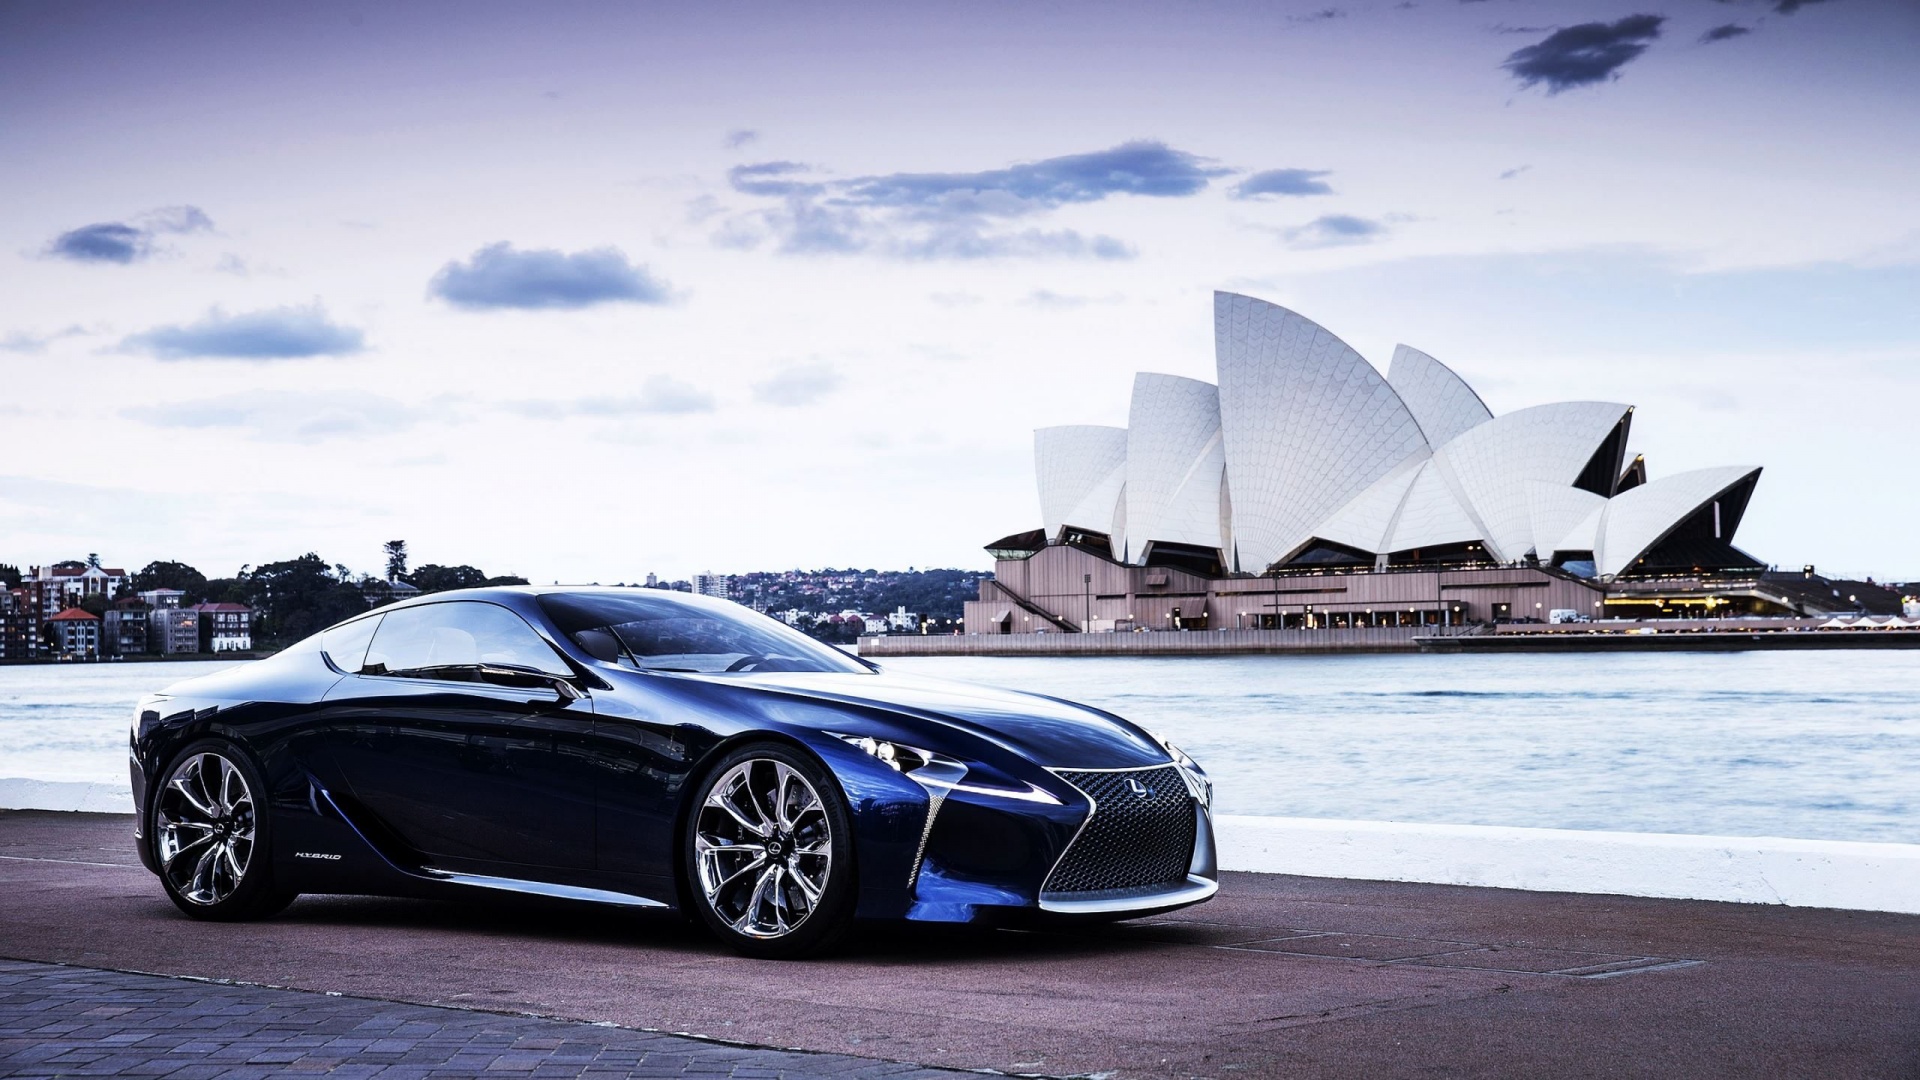 On October 19 2015 By Admin Comments Off On Lexus Hd - Sydney Opera House , HD Wallpaper & Backgrounds